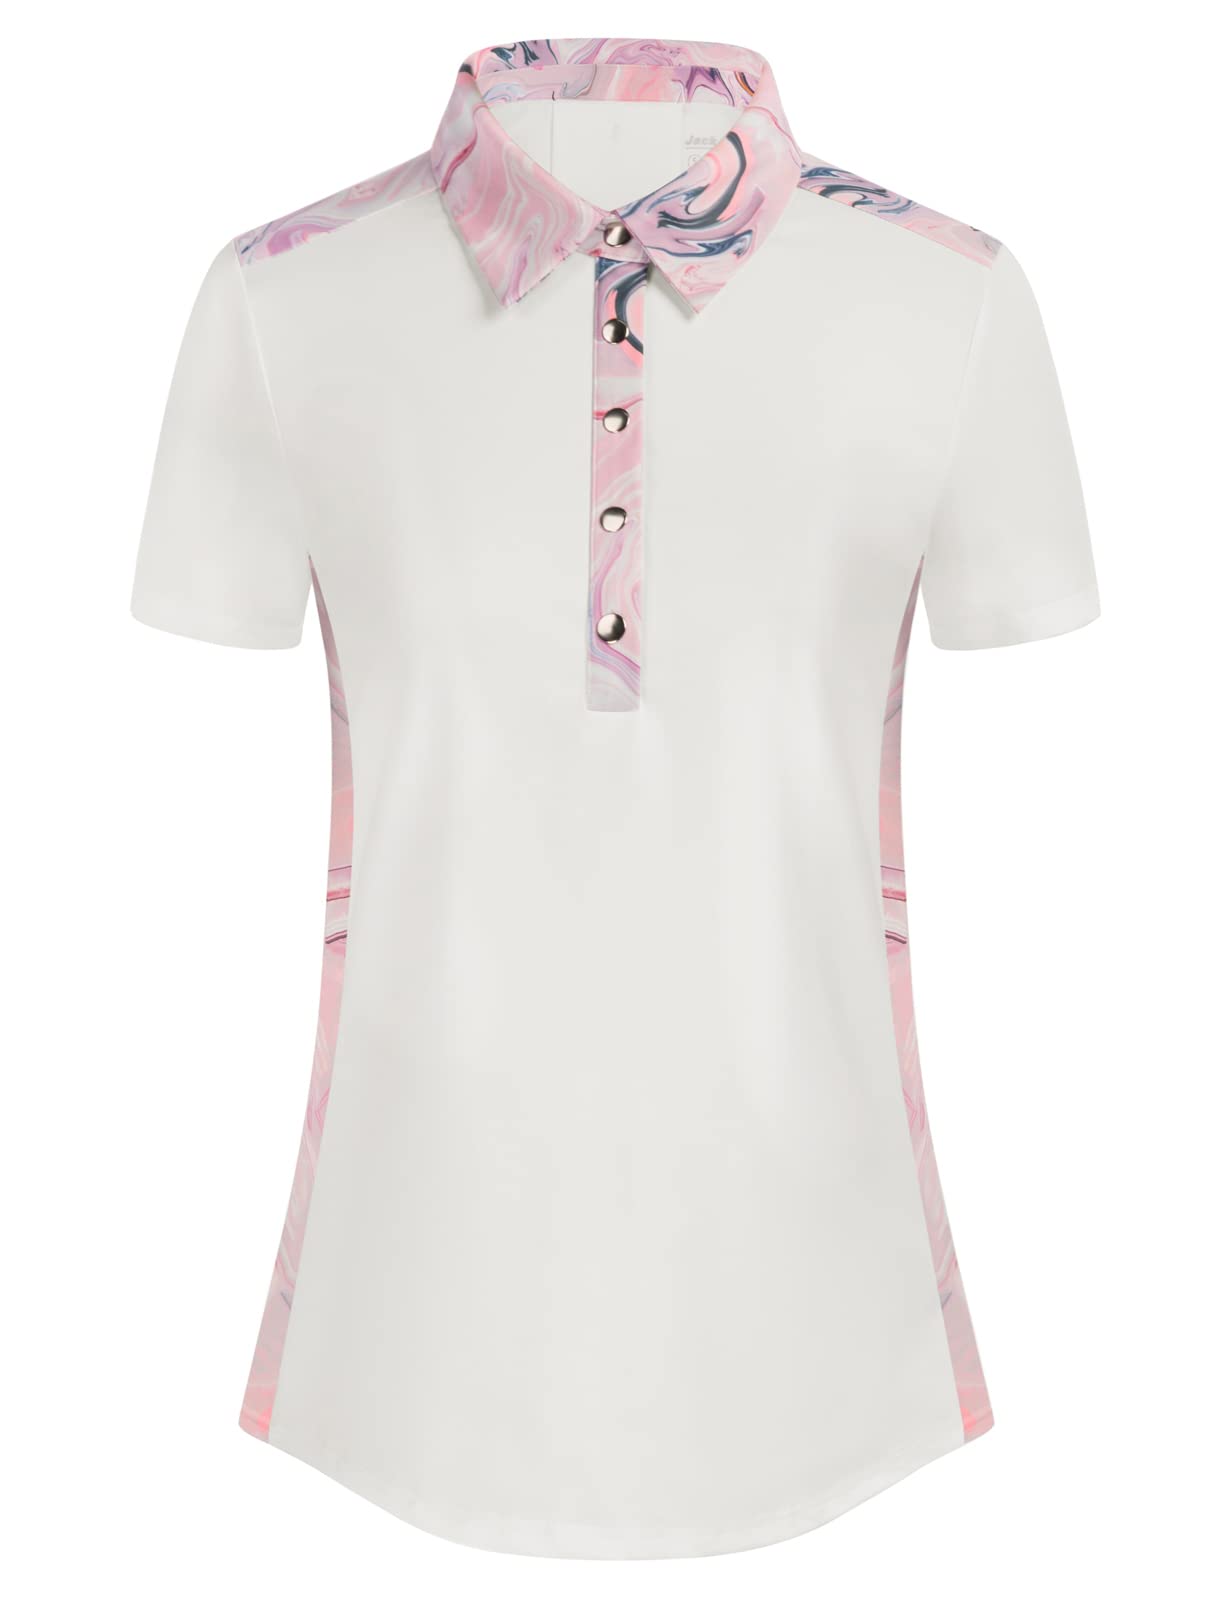 JACK SMITH Womens Golf Shirts Short Sleeve Color Block Snap Sports Polo  Shirt Moisture Wicking Lightweight Active Top Large White/Pink Print